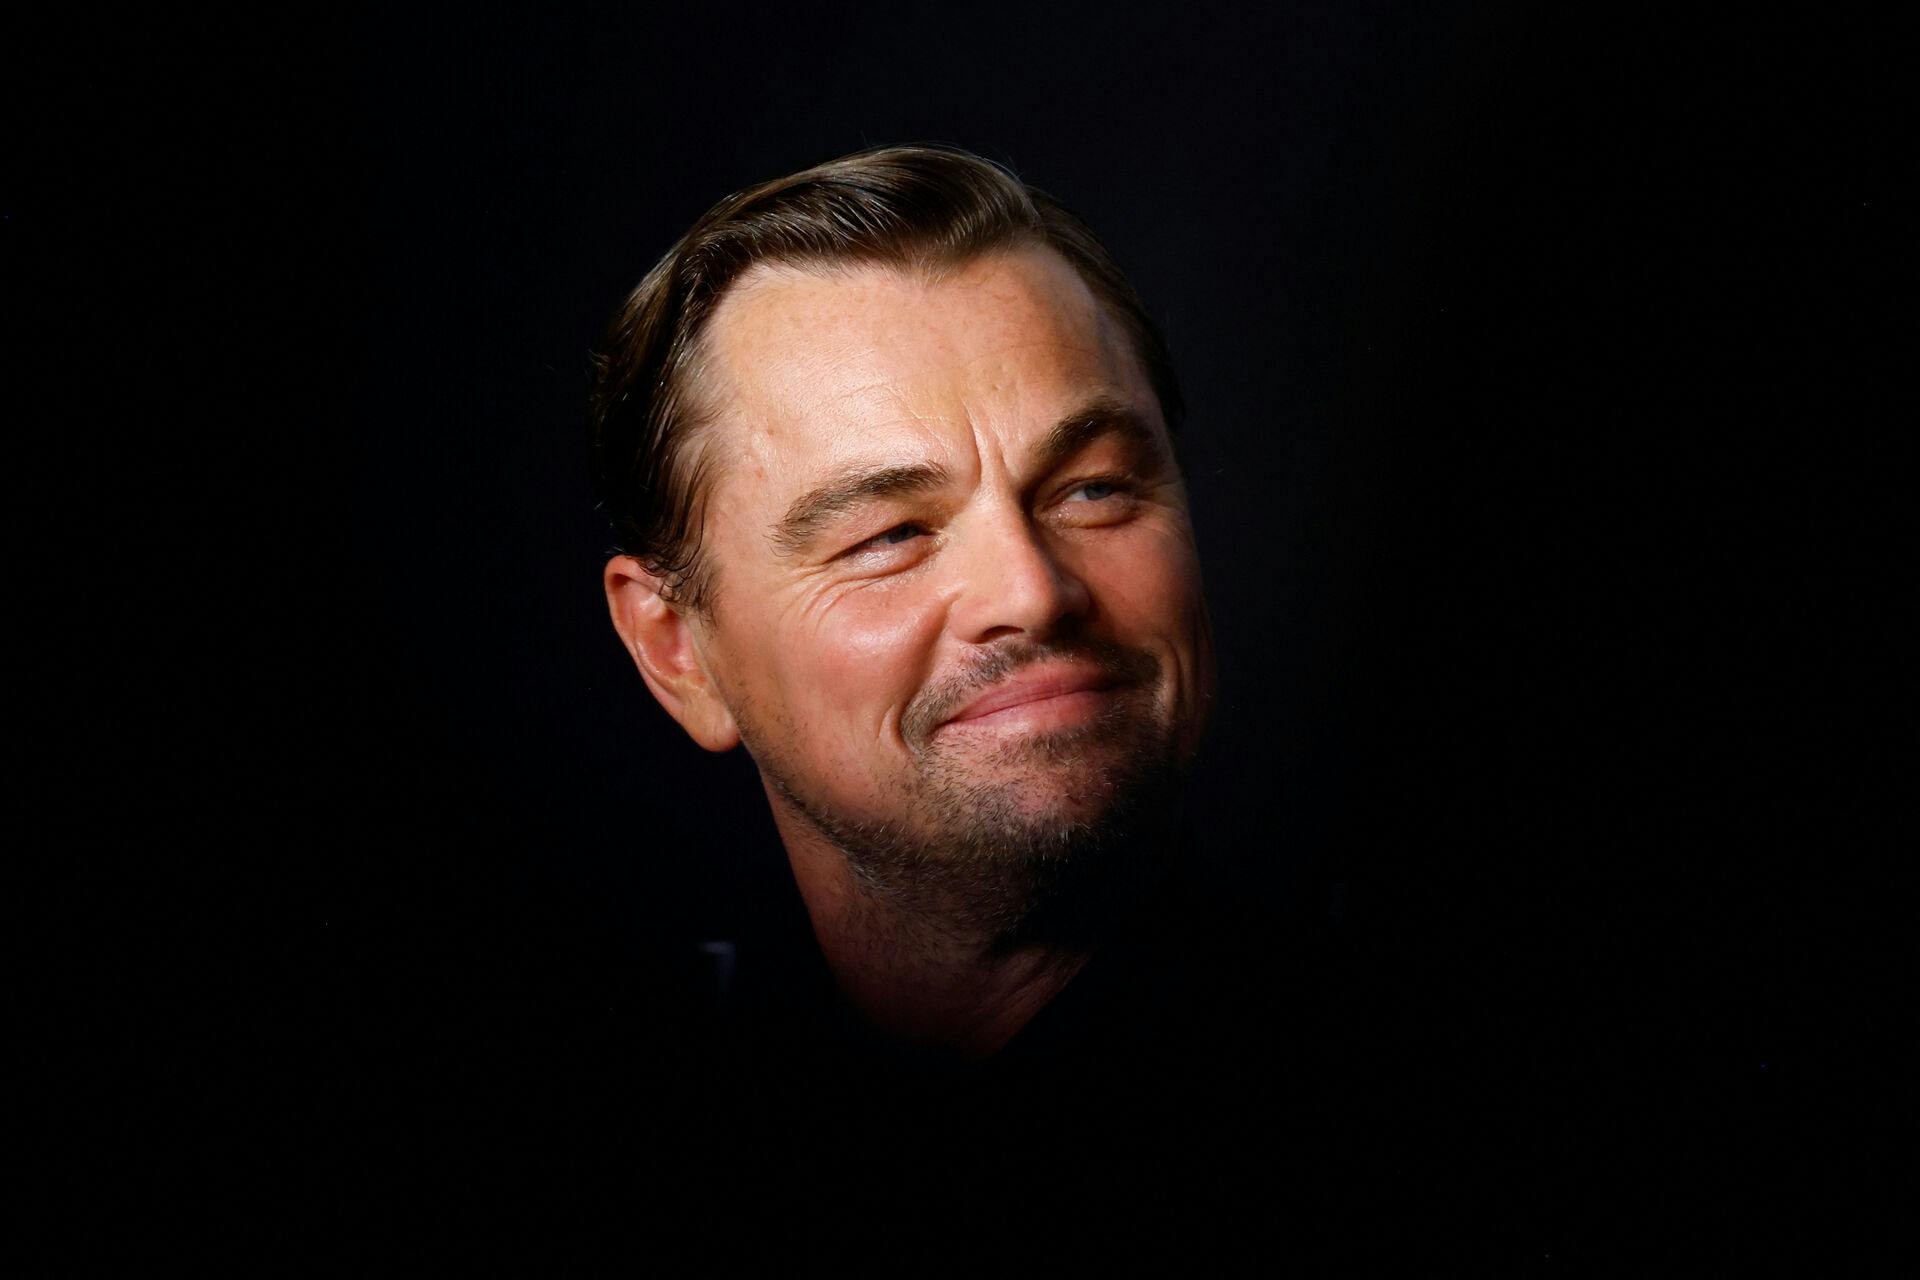 The 76th Cannes Film Festival - Press conference for the film "Killers of the Flower Moon" Out of Competition - Cannes, France, May 21, 2023. Cast member Leonardo DiCaprio attends. REUTERS/Eric Gaillard TPX IMAGES OF THE DAY